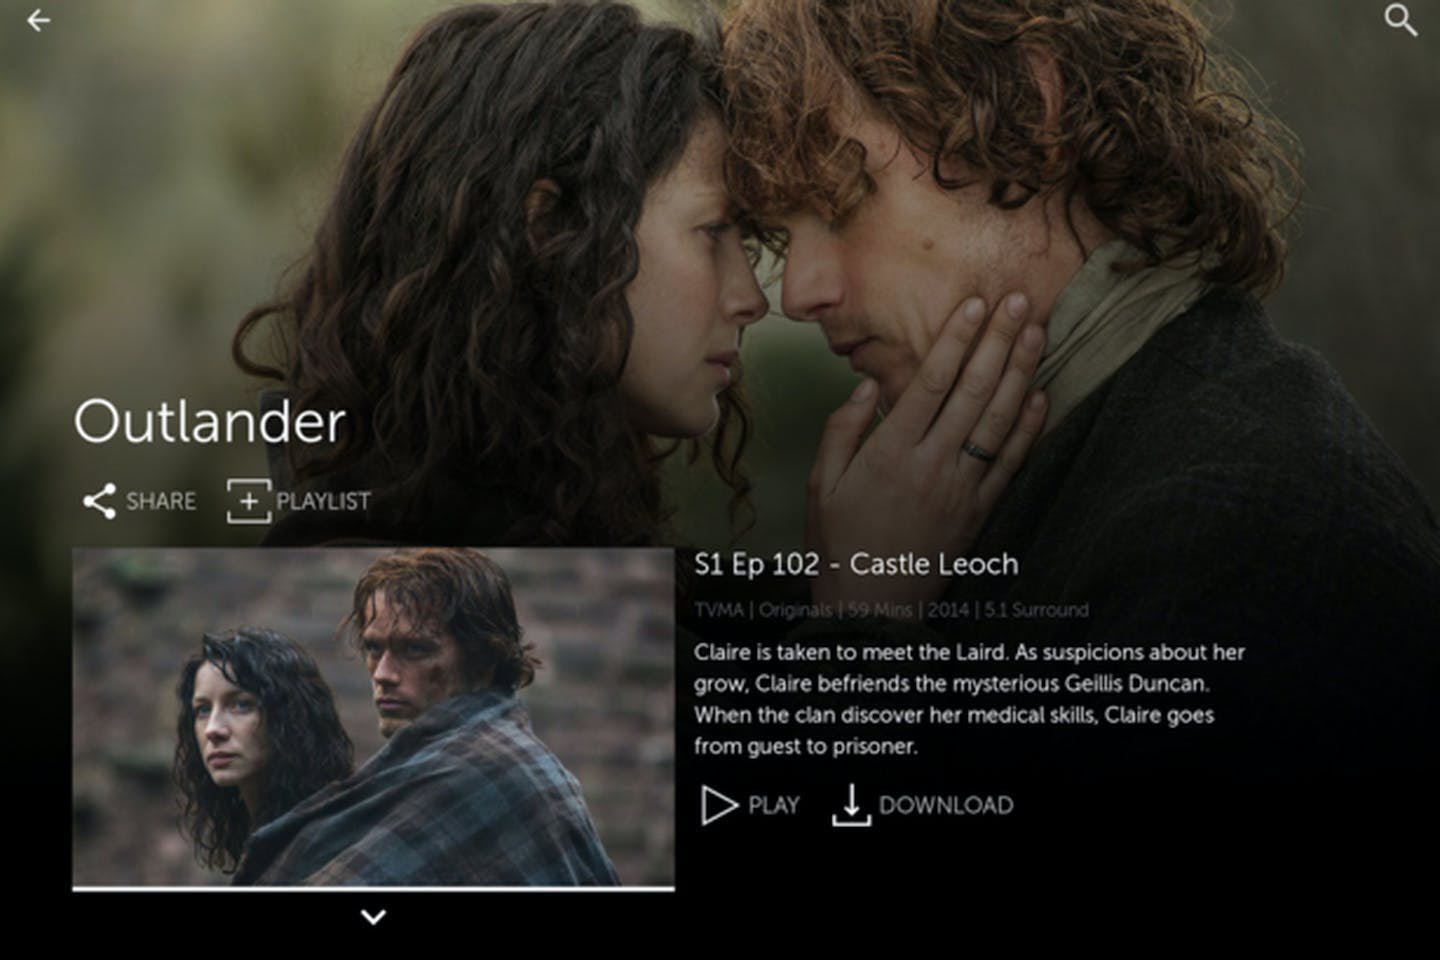 You can stream Outlander on Starz while saving money, whether you’re a new or returning subscriber.